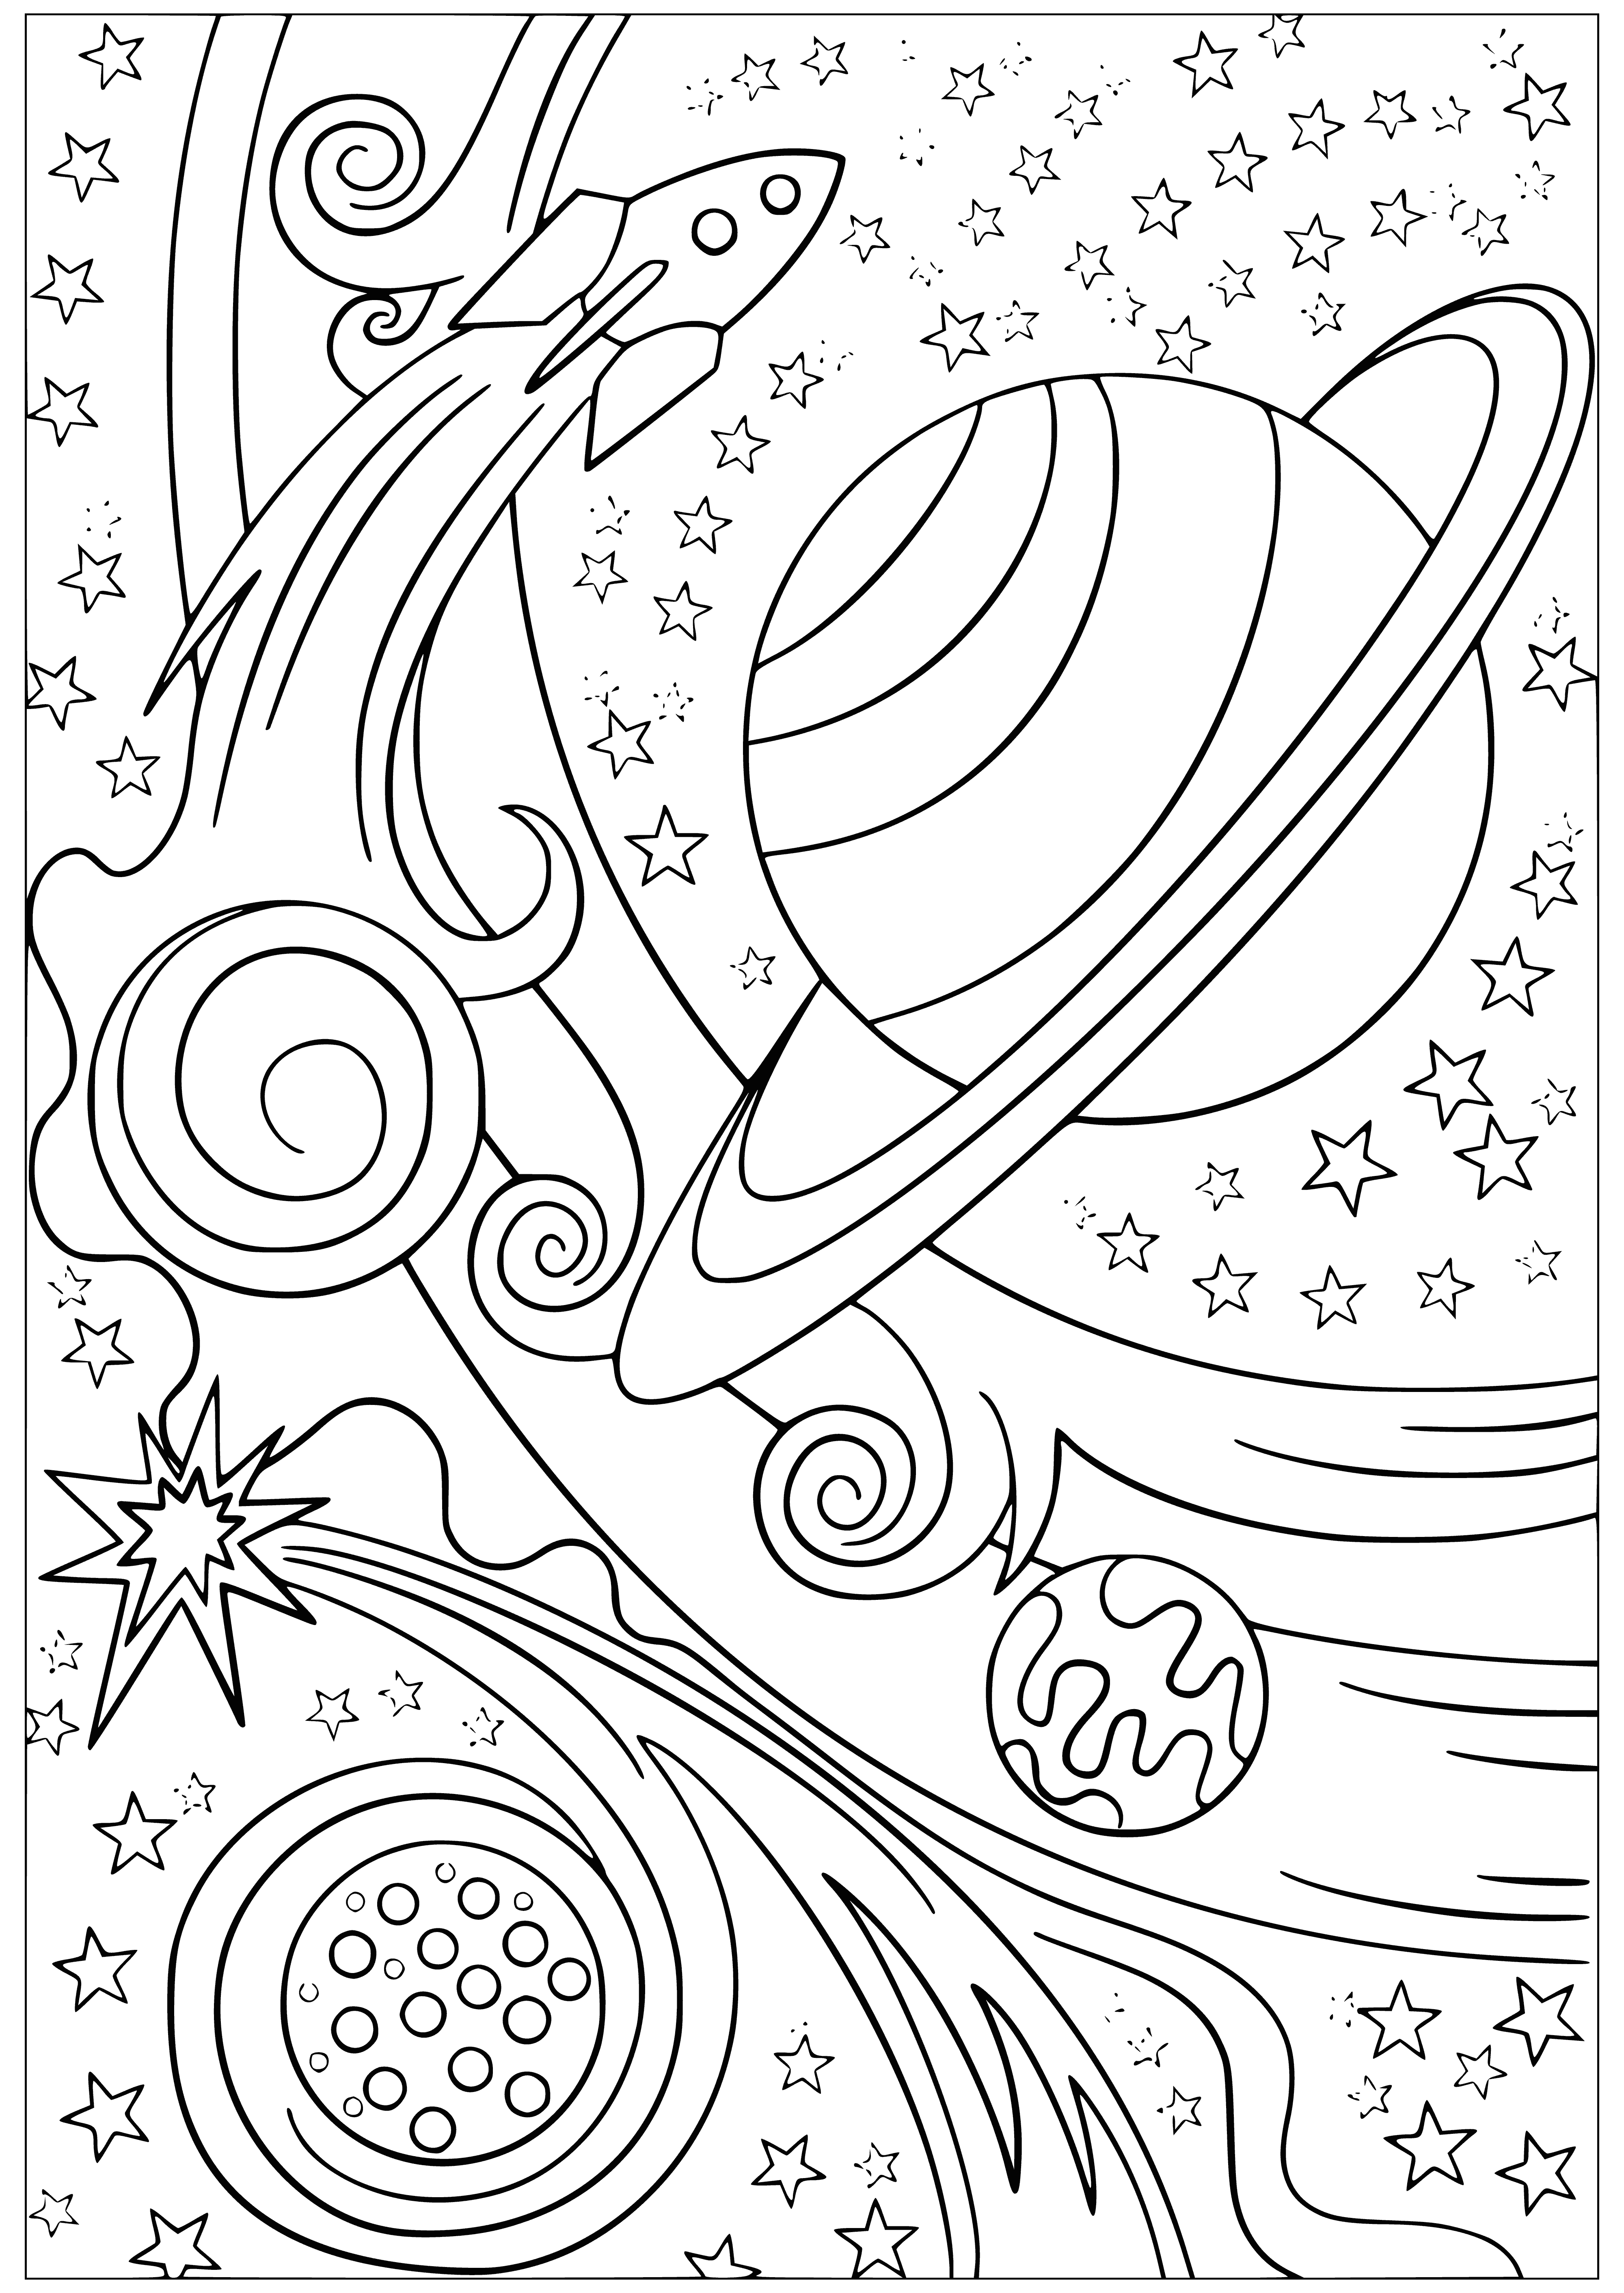 Rocket in space coloring page